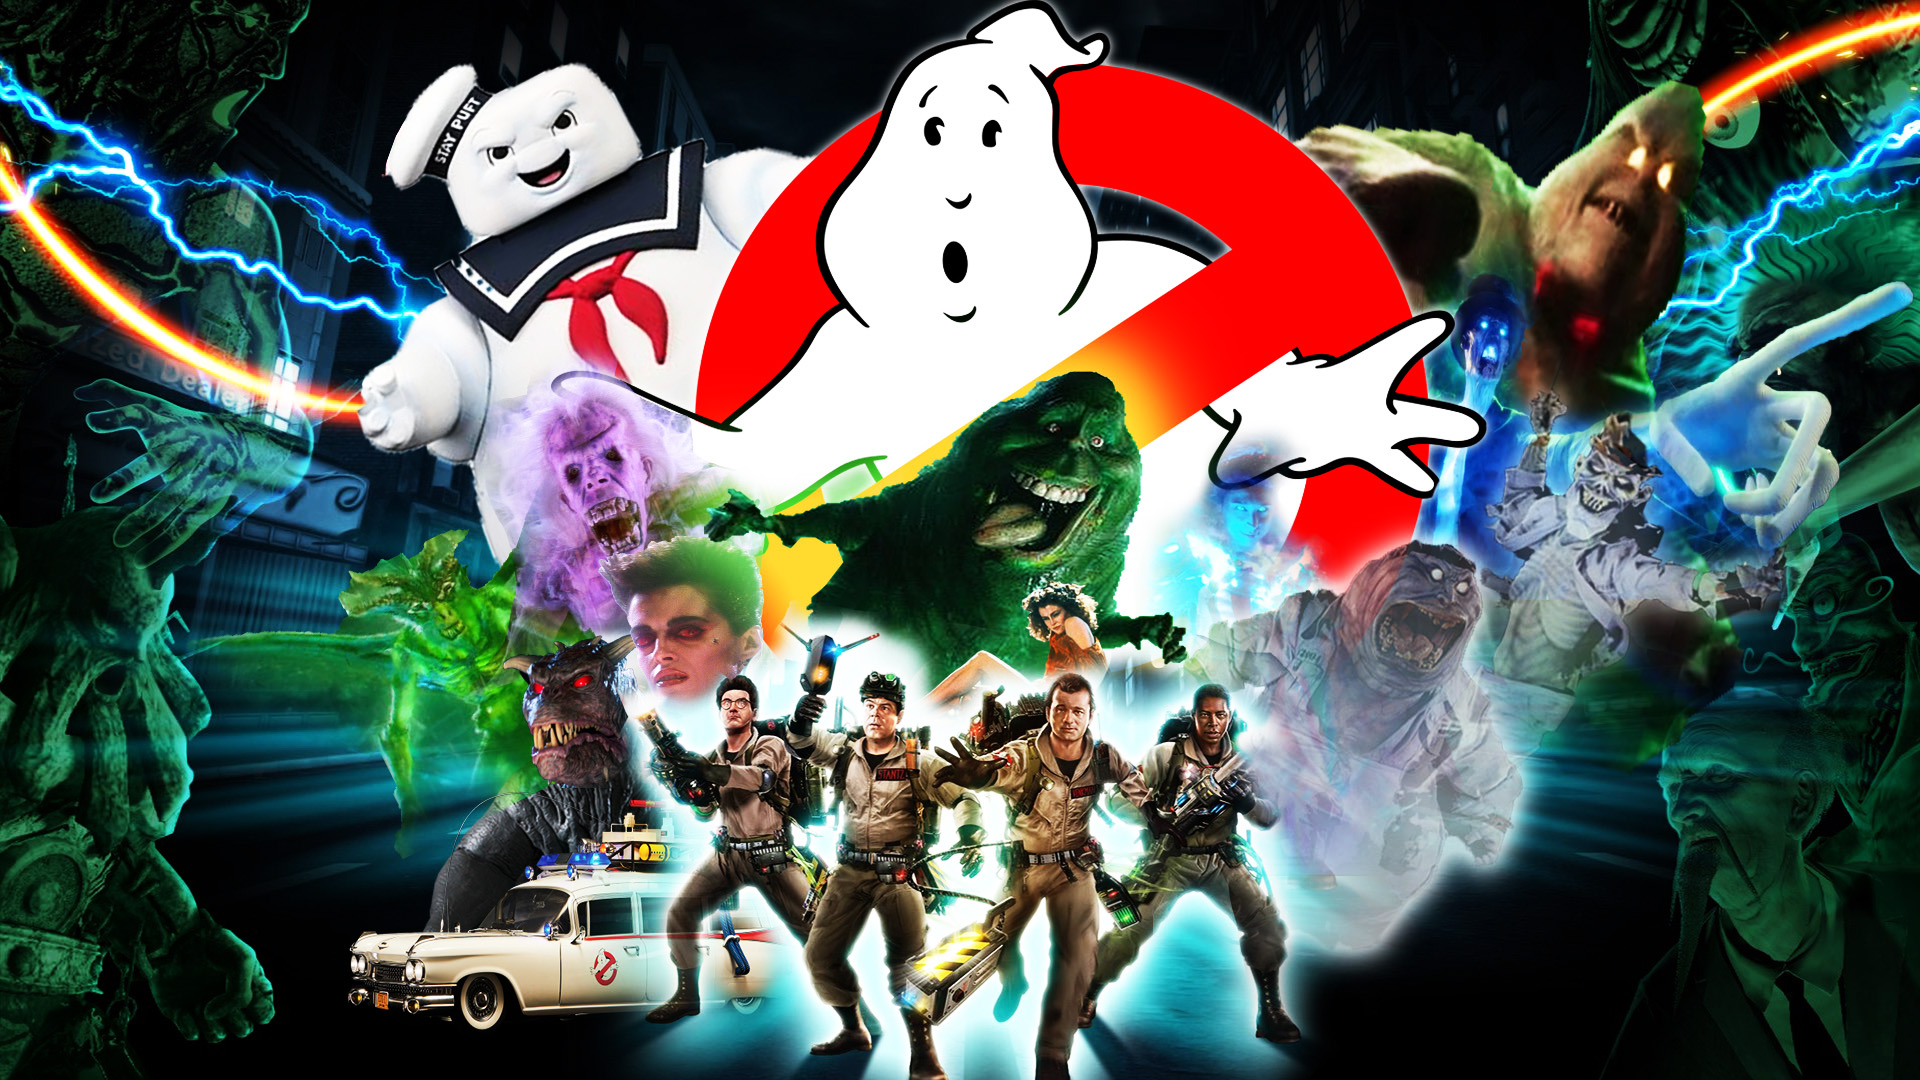 Ghostbusters wallpaper by thekingblader on